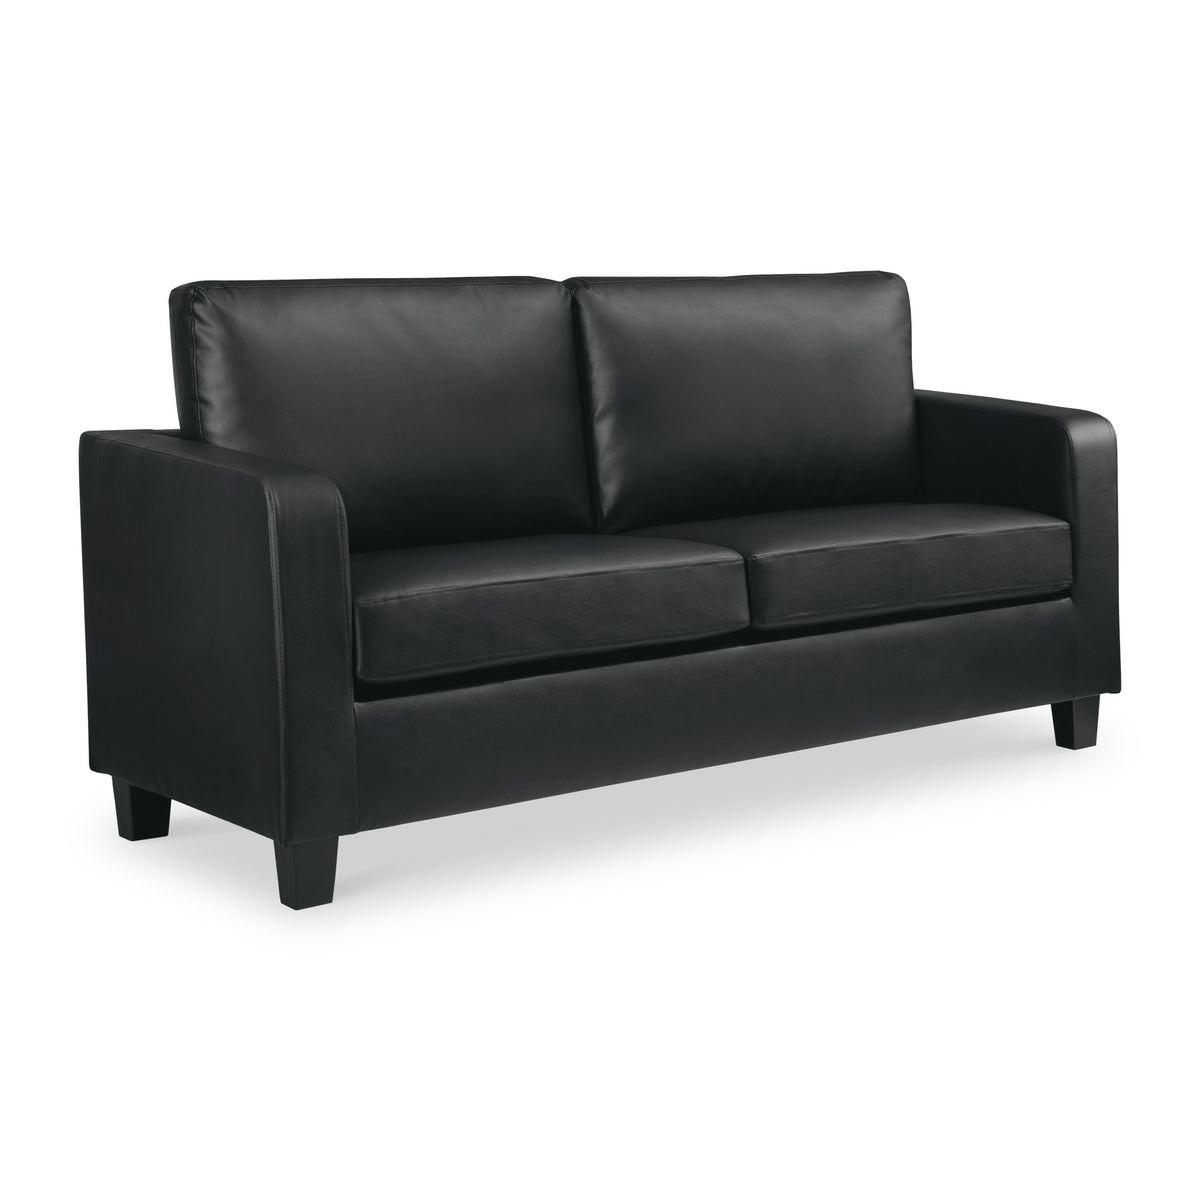 Cullen Faux Leather 3 Seater Sofa